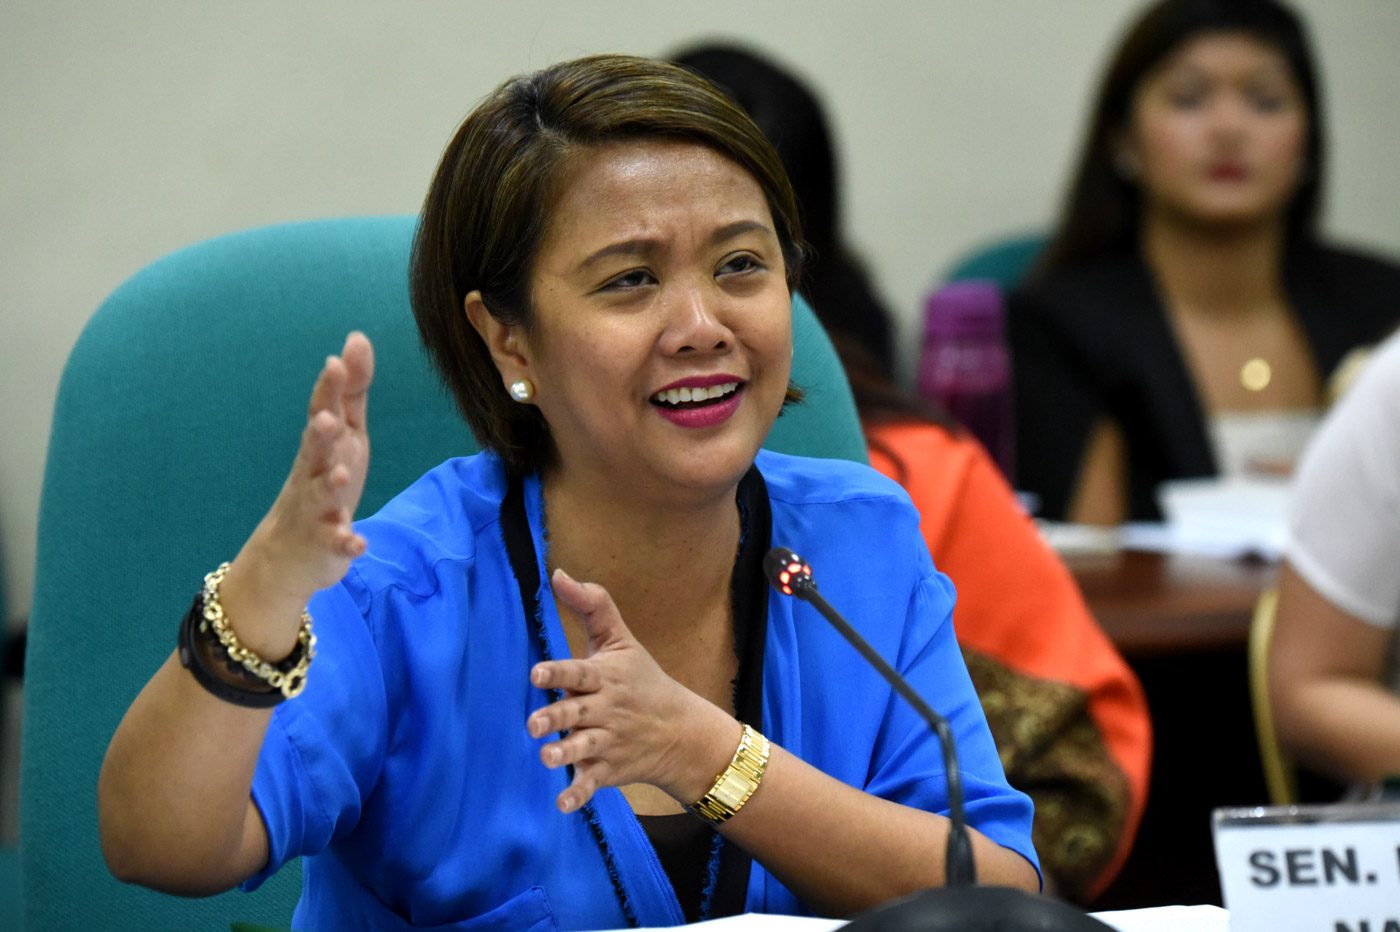 For distance learning, Nancy Binay advises DepEd to train parents too